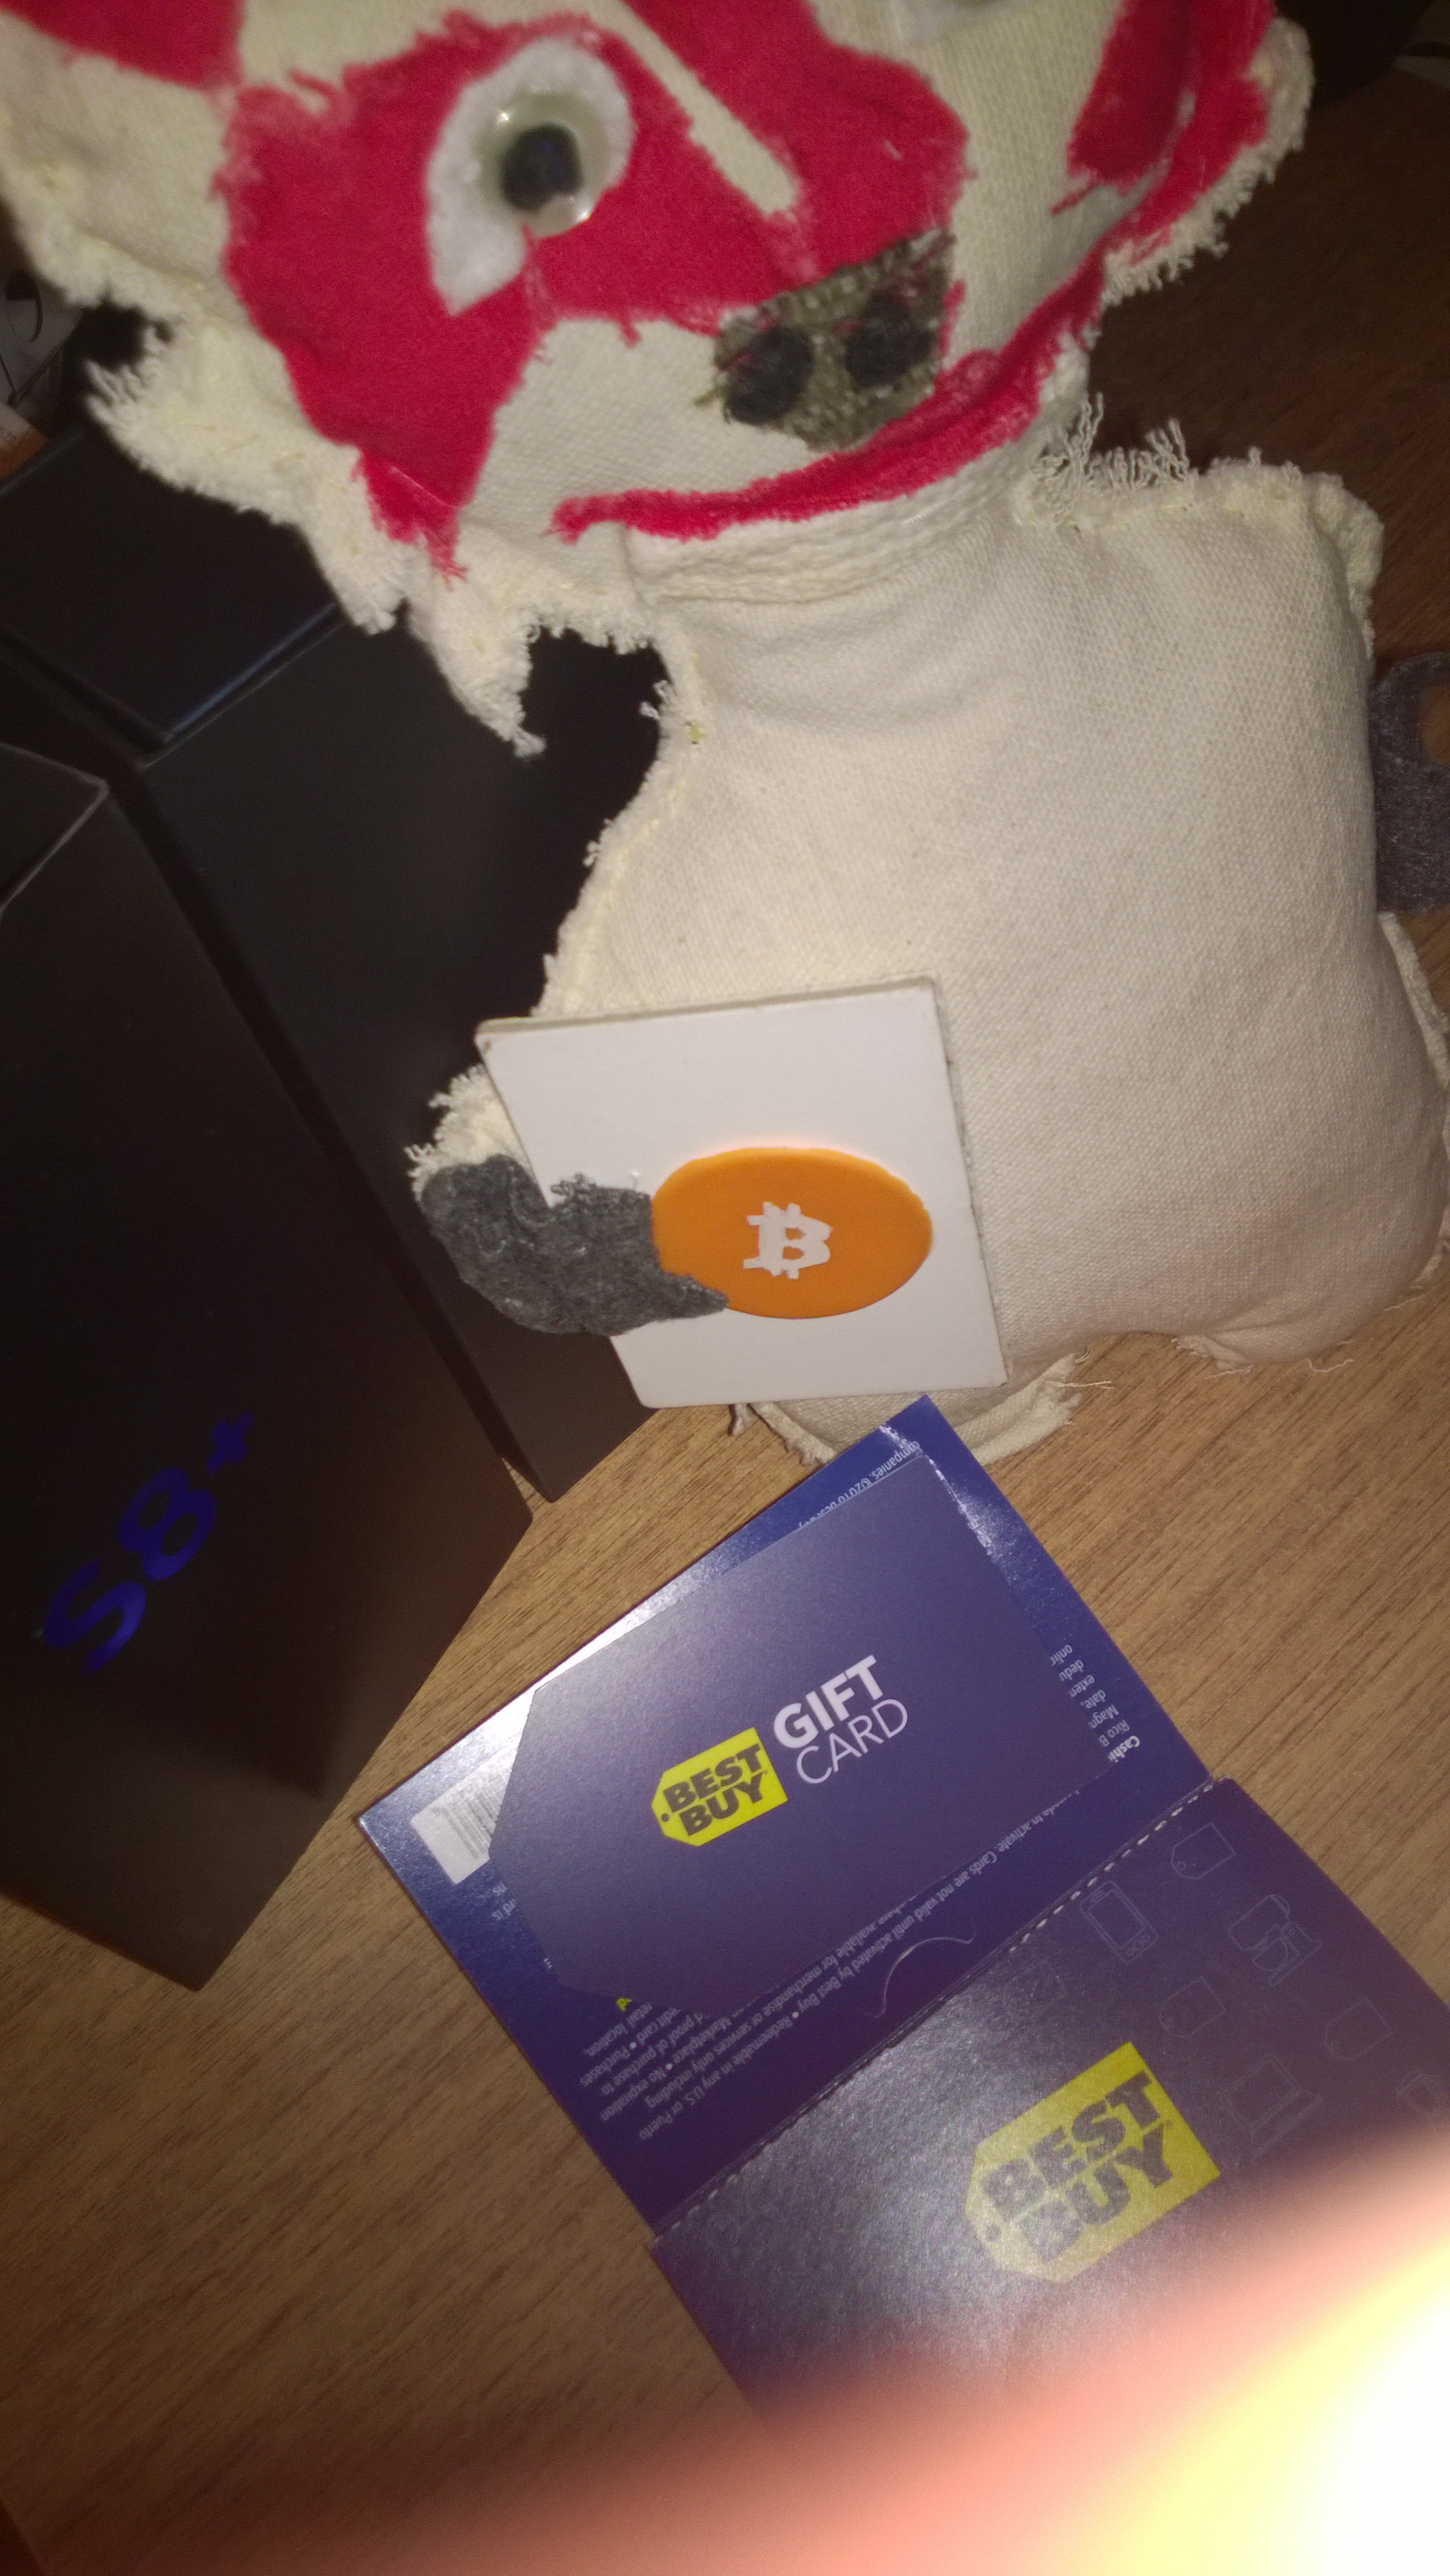 Nandi Bear and his new Samsung Galaxy s8 PLUS US unlocked and Gear VR virtual reality headset with controller Nandibear